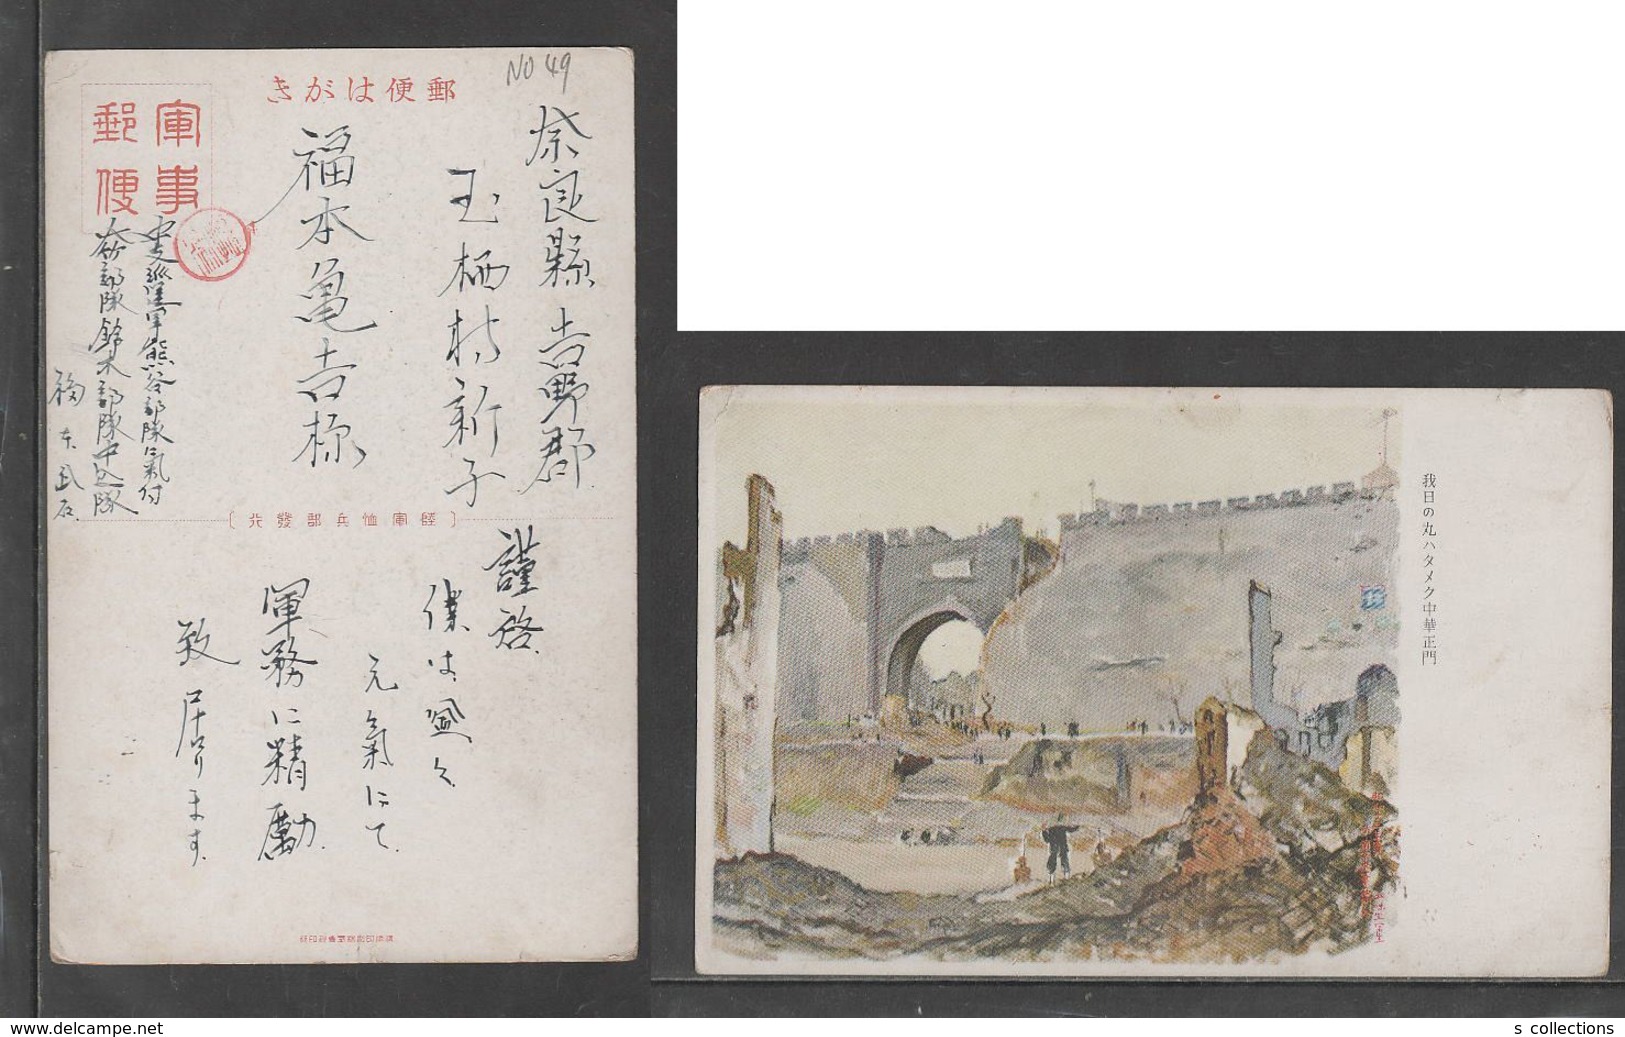 JAPAN WWII Military Nanjing China Gate Picture Postcard CENTRAL CHINA WW2 MANCHURIA CHINE MANDCHOUKOUO JAPON GIAPPONE - 1943-45 Shanghai & Nanjing